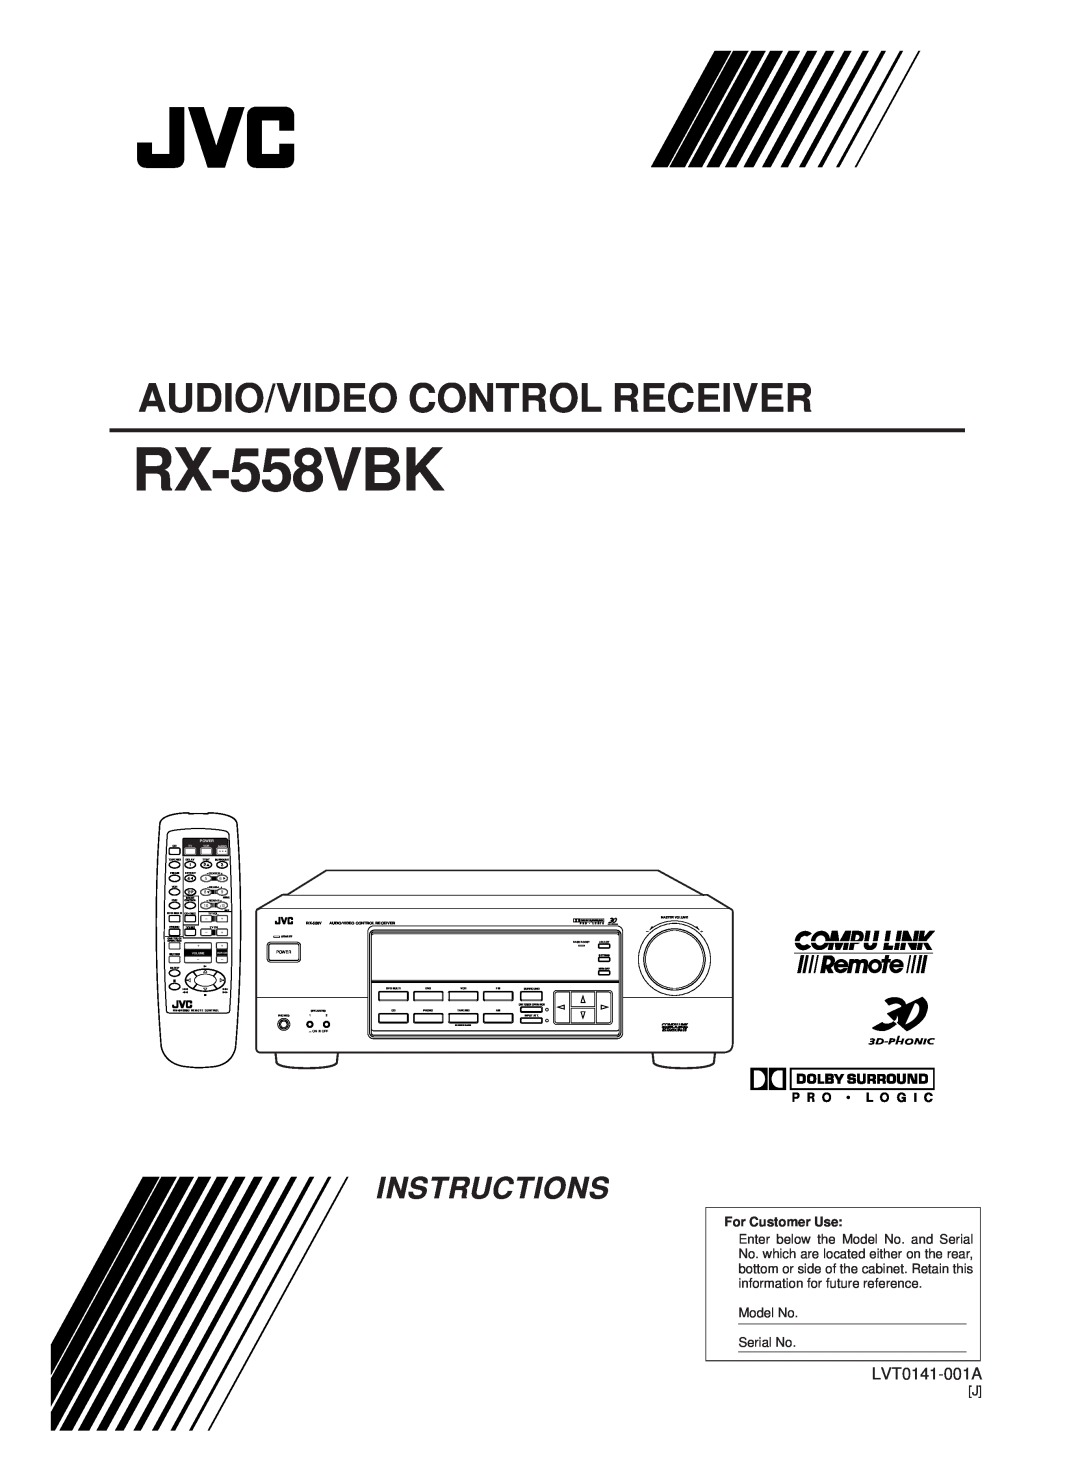 JVC RX-558VBK manual Audio/Video Control Receiver, Instructions, For Customer Use, Model No Serial No, Power, Vcr Audio 